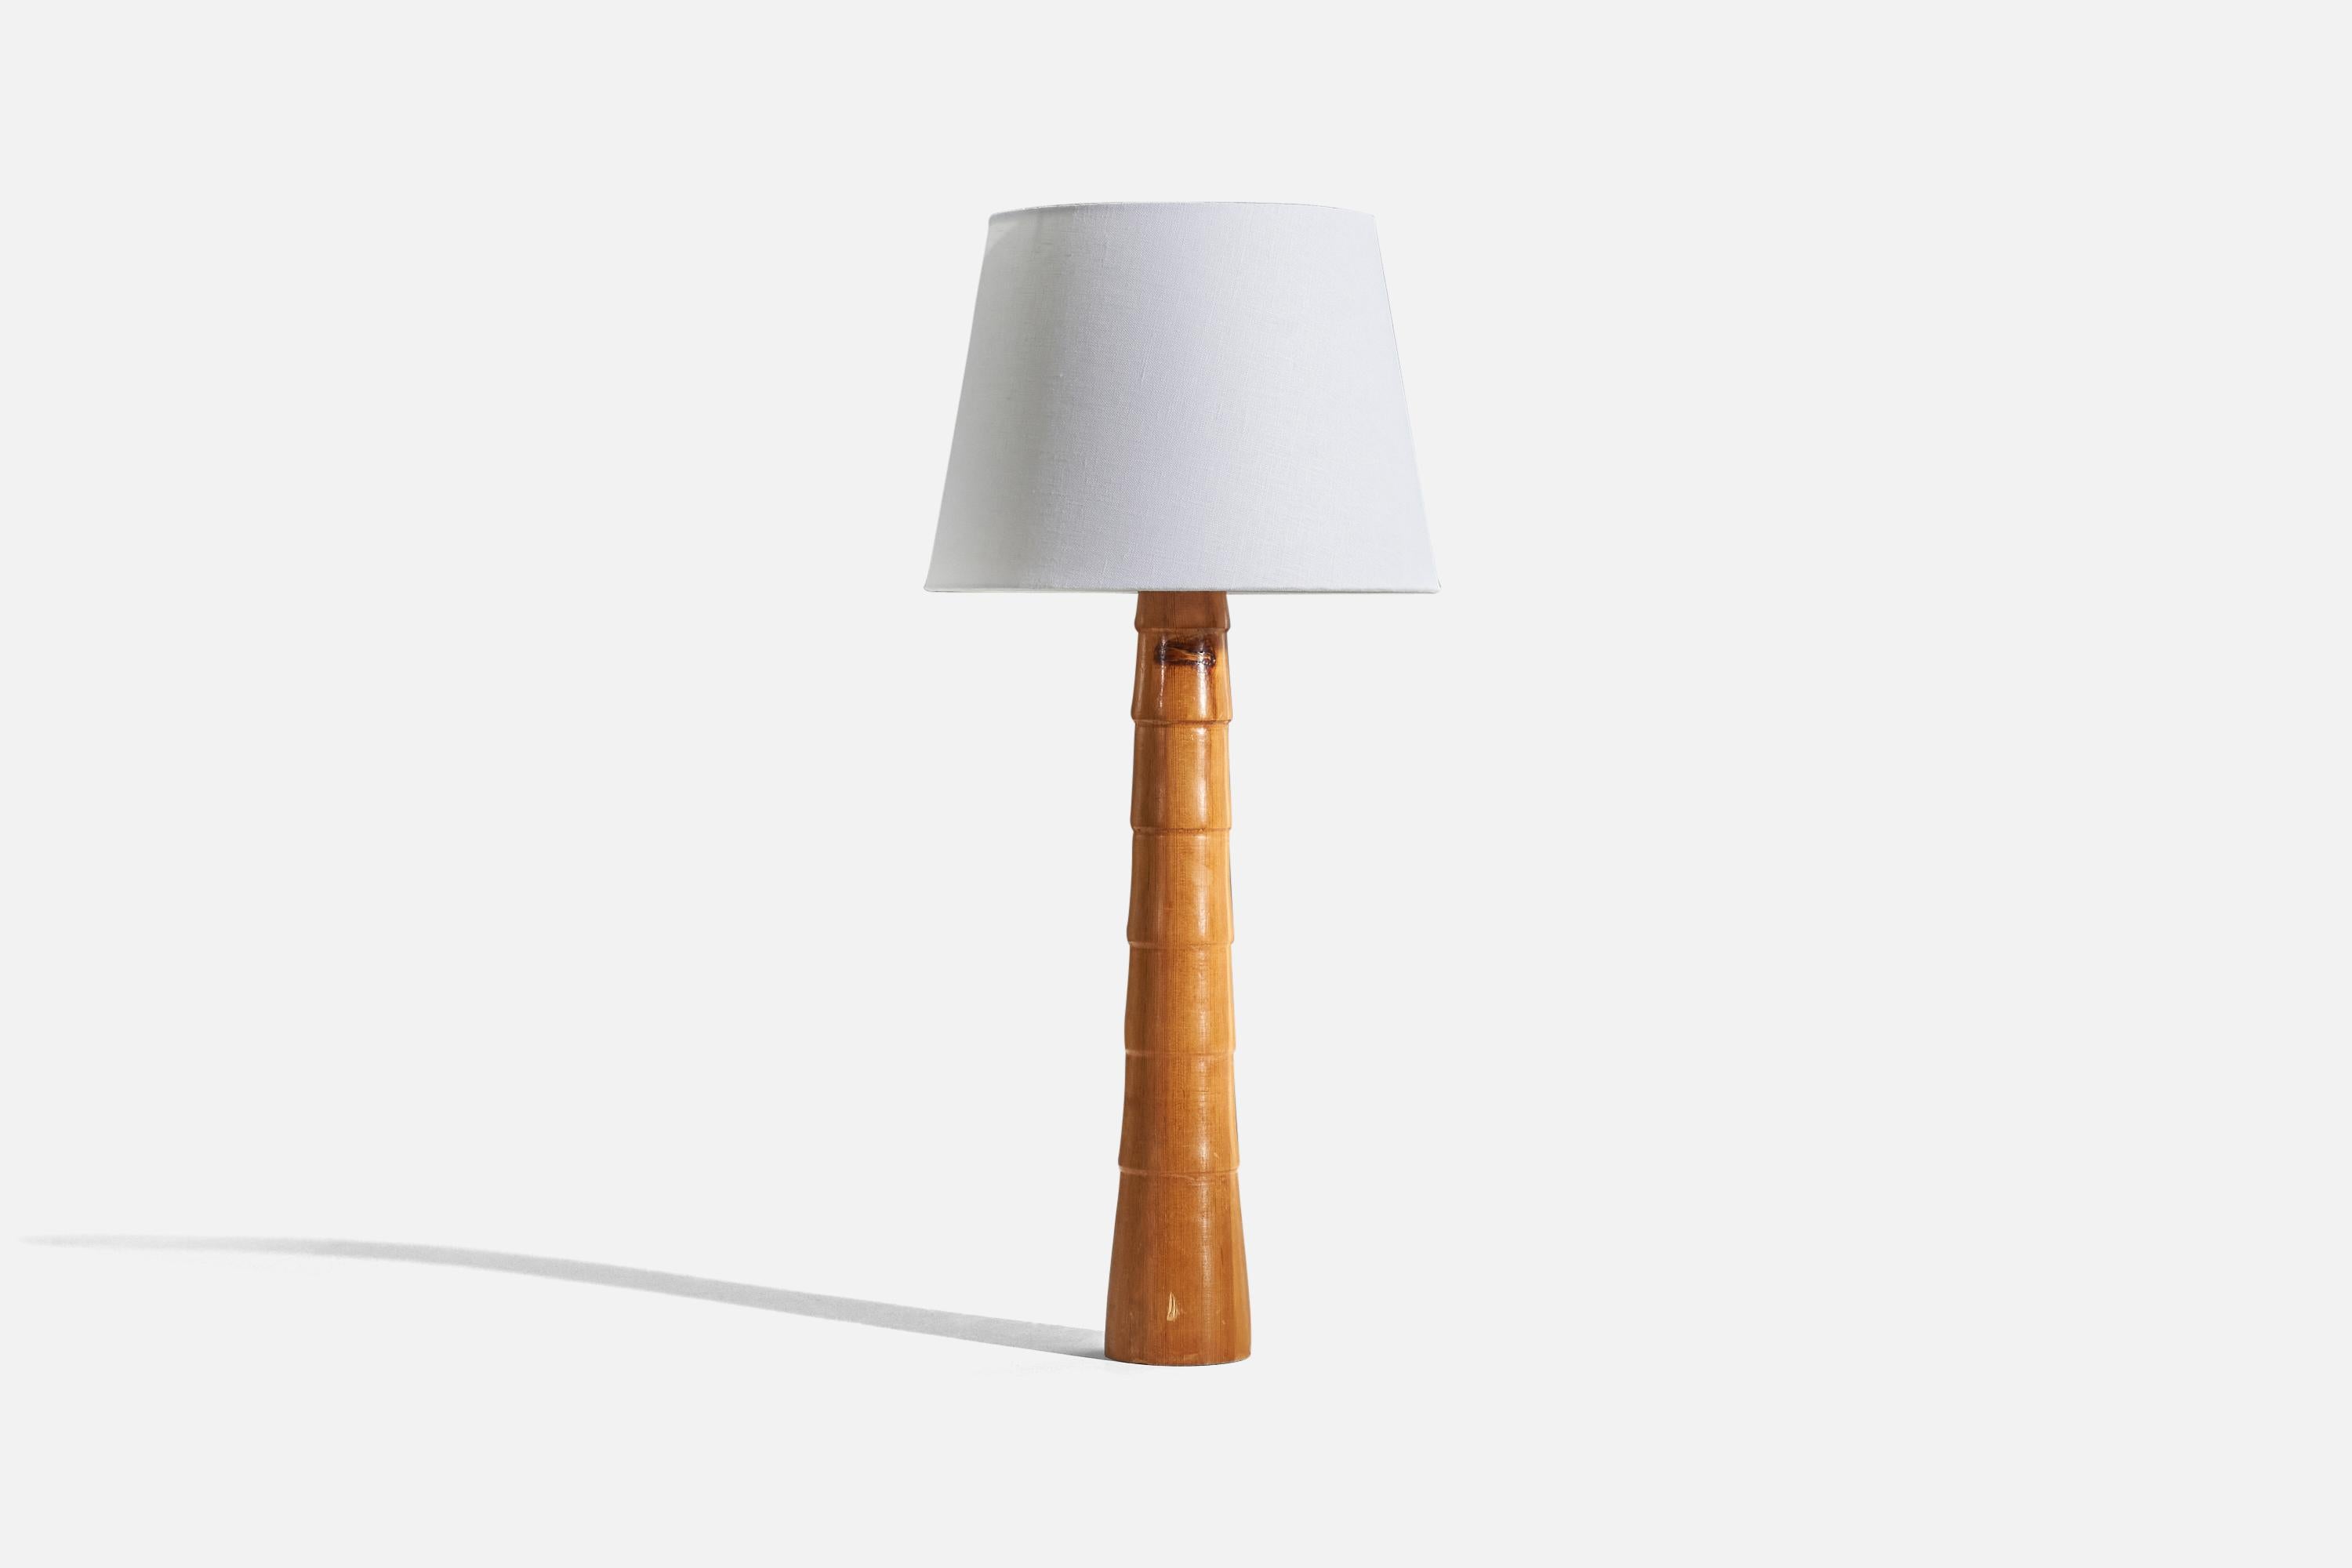 A wooden table lamp designed and produced in Sweden, c. 1960s. 

Sold without lampshade. 
Dimensions of lamp (inches) : 21.43 x 3.56 x 3.56 (H x W x D)
Dimensions of shade (inches) : 9 x 12 x 9 (T x B x S)
Dimension of lamp with shade (inches)